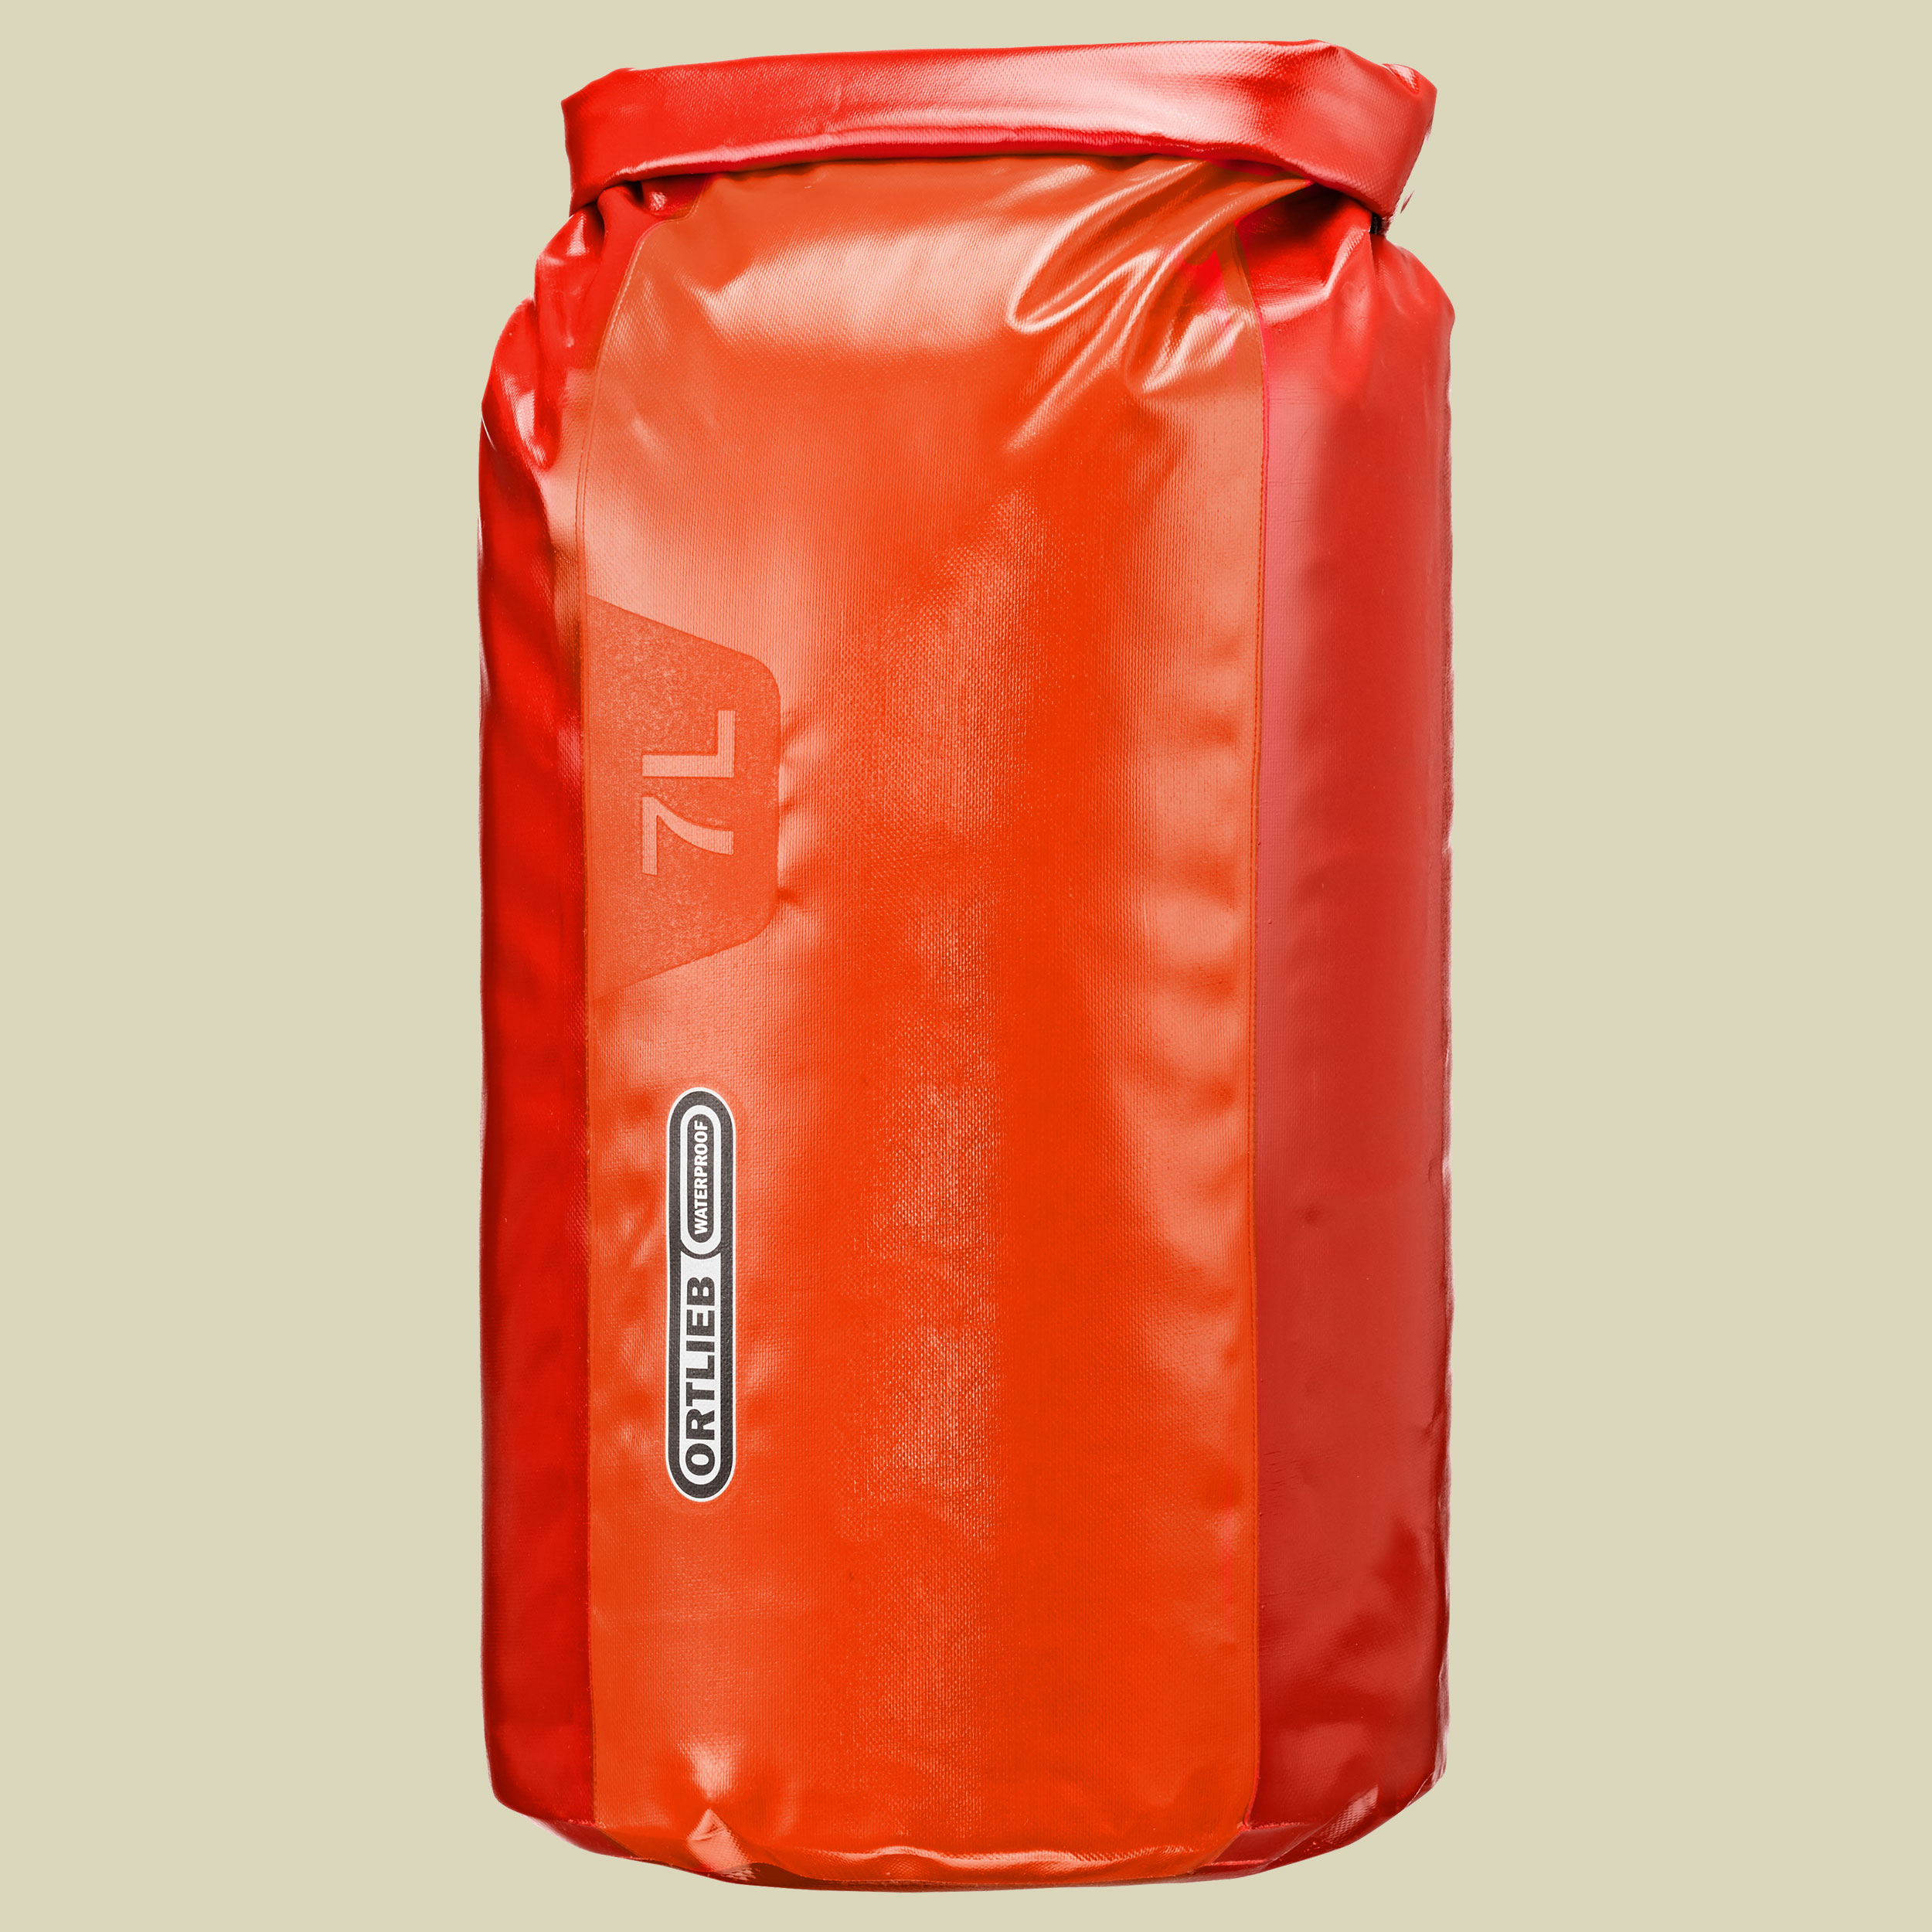 Dry-Bag PD 350 Volumen in Liter 7 Farbe cranberry-signalrot